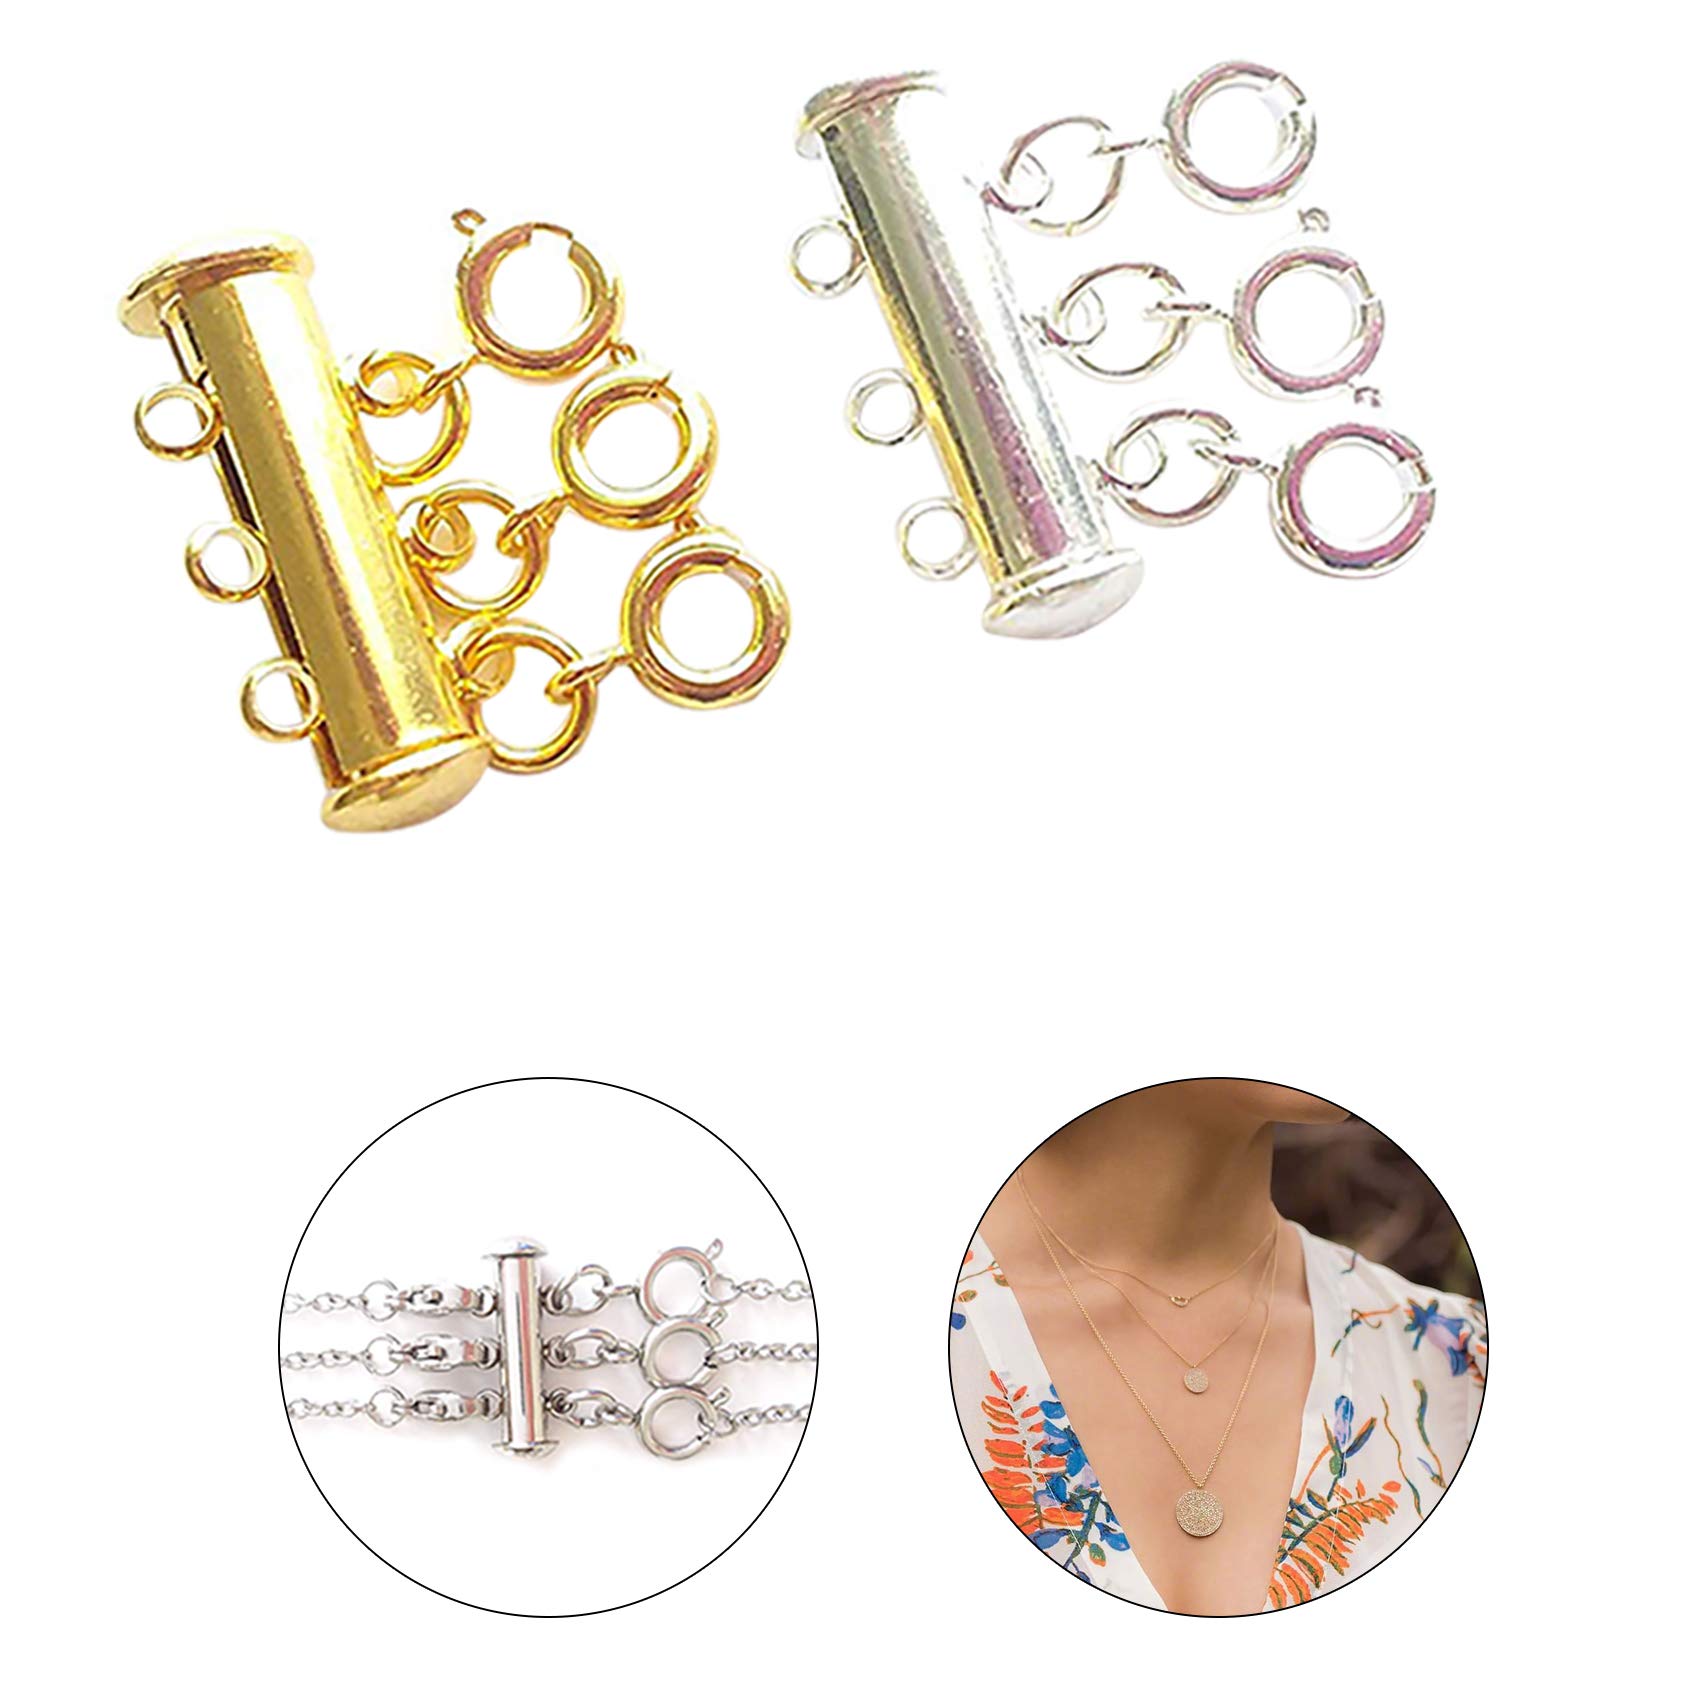 YMCAFZ Layered Necklace Spacer Clasp, 3 Strands Necklaces Slide Magnetic Tube Lock with Lobster Clasps, Jewelry Clasps Connectors for Layered Bracelet Jewelry Crafts Necklace, 2 Pack Gold and Sliver